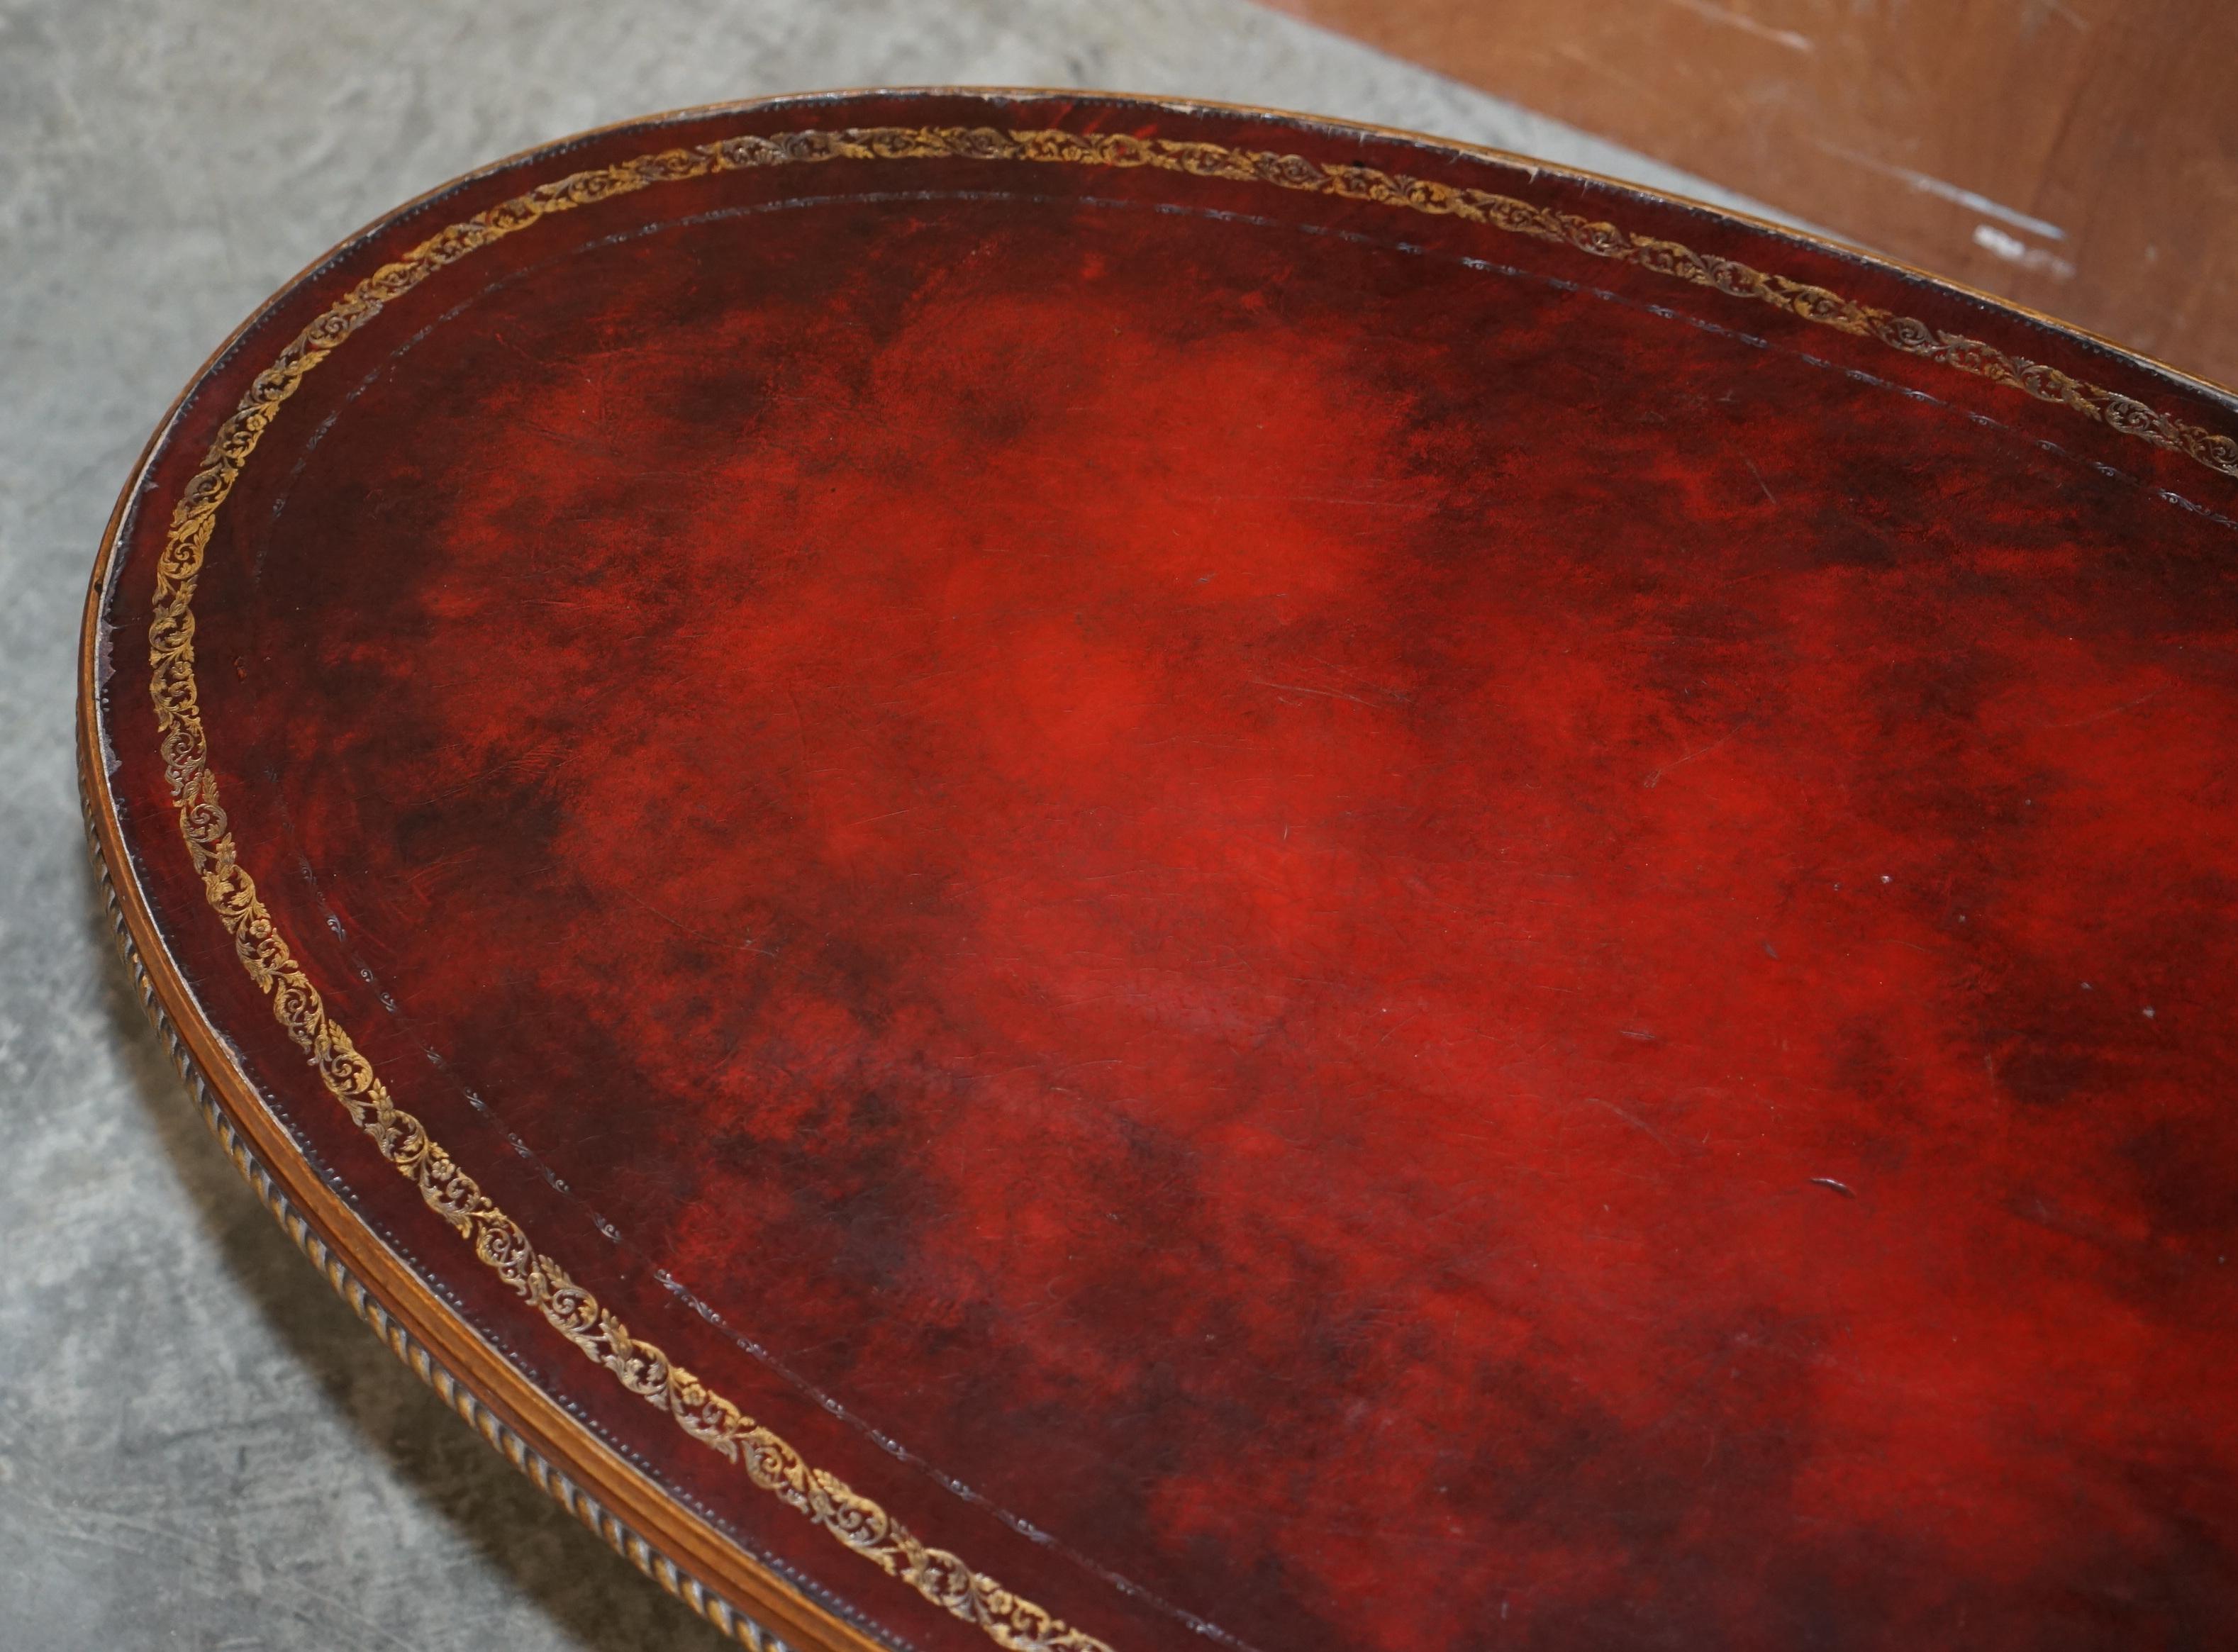 Hand-Crafted Oxblood Leather Oval Roman Pedestal Base Coffee or Cocktail Table Nice Find